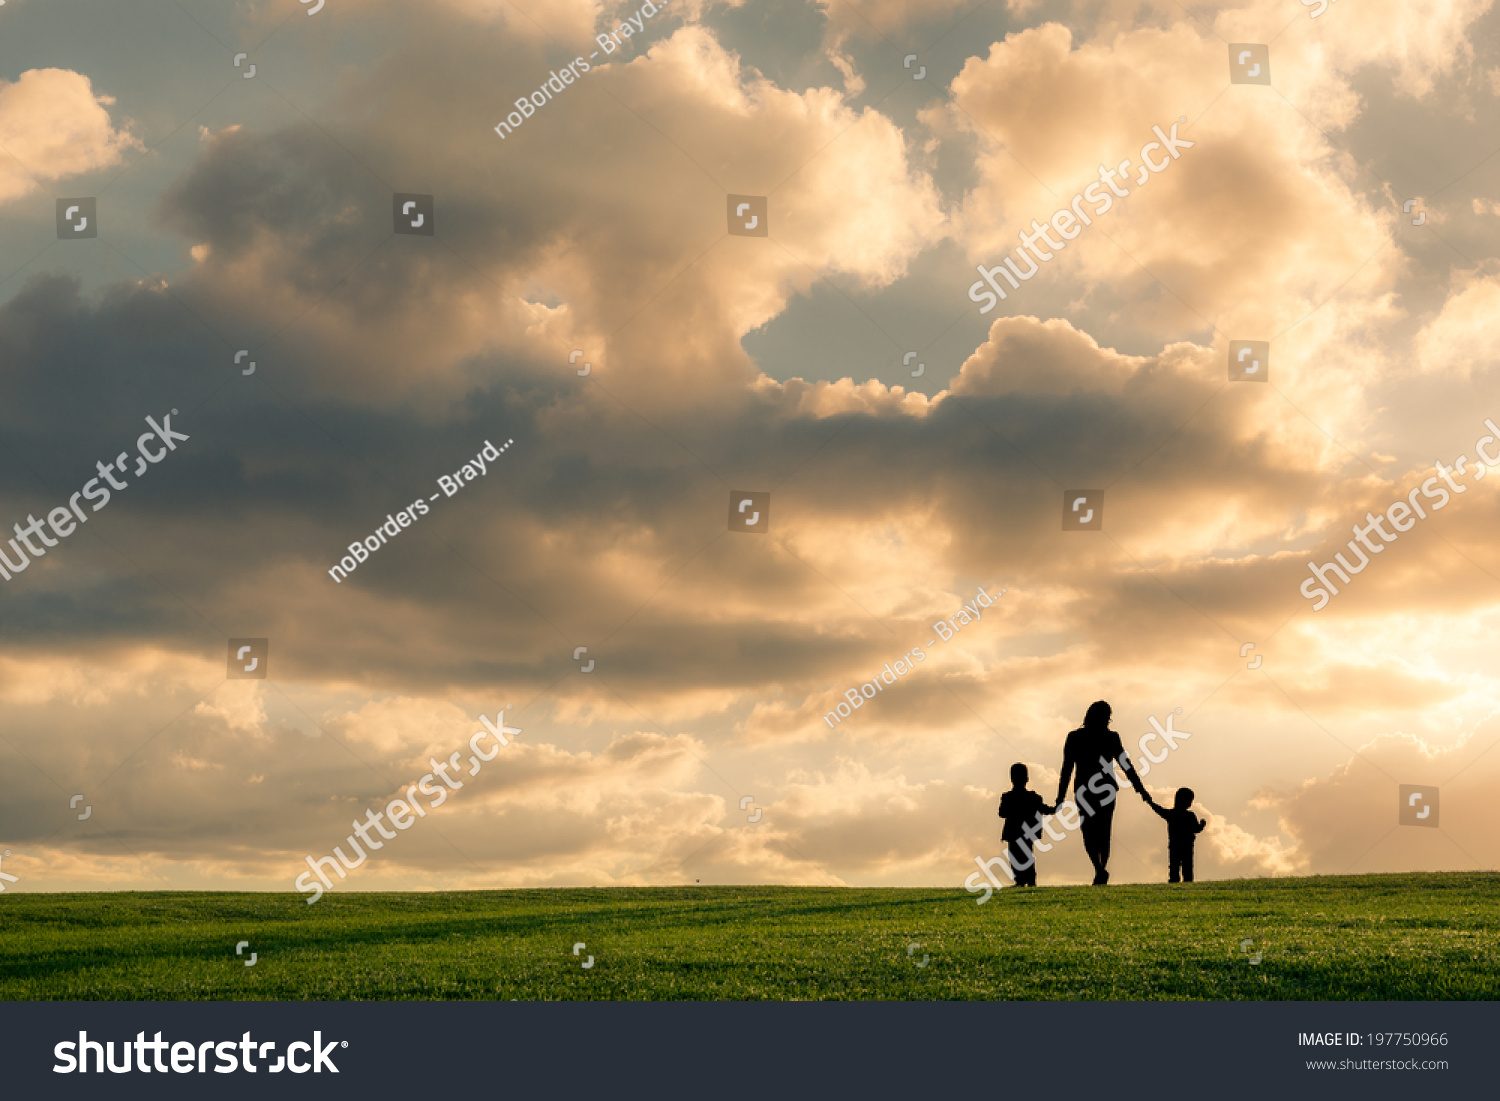 Stock Photo Family Silhouette Against A Bright Cloudy Sky At Sunset Mother And Two Boys Walking Holding Hands 197750966